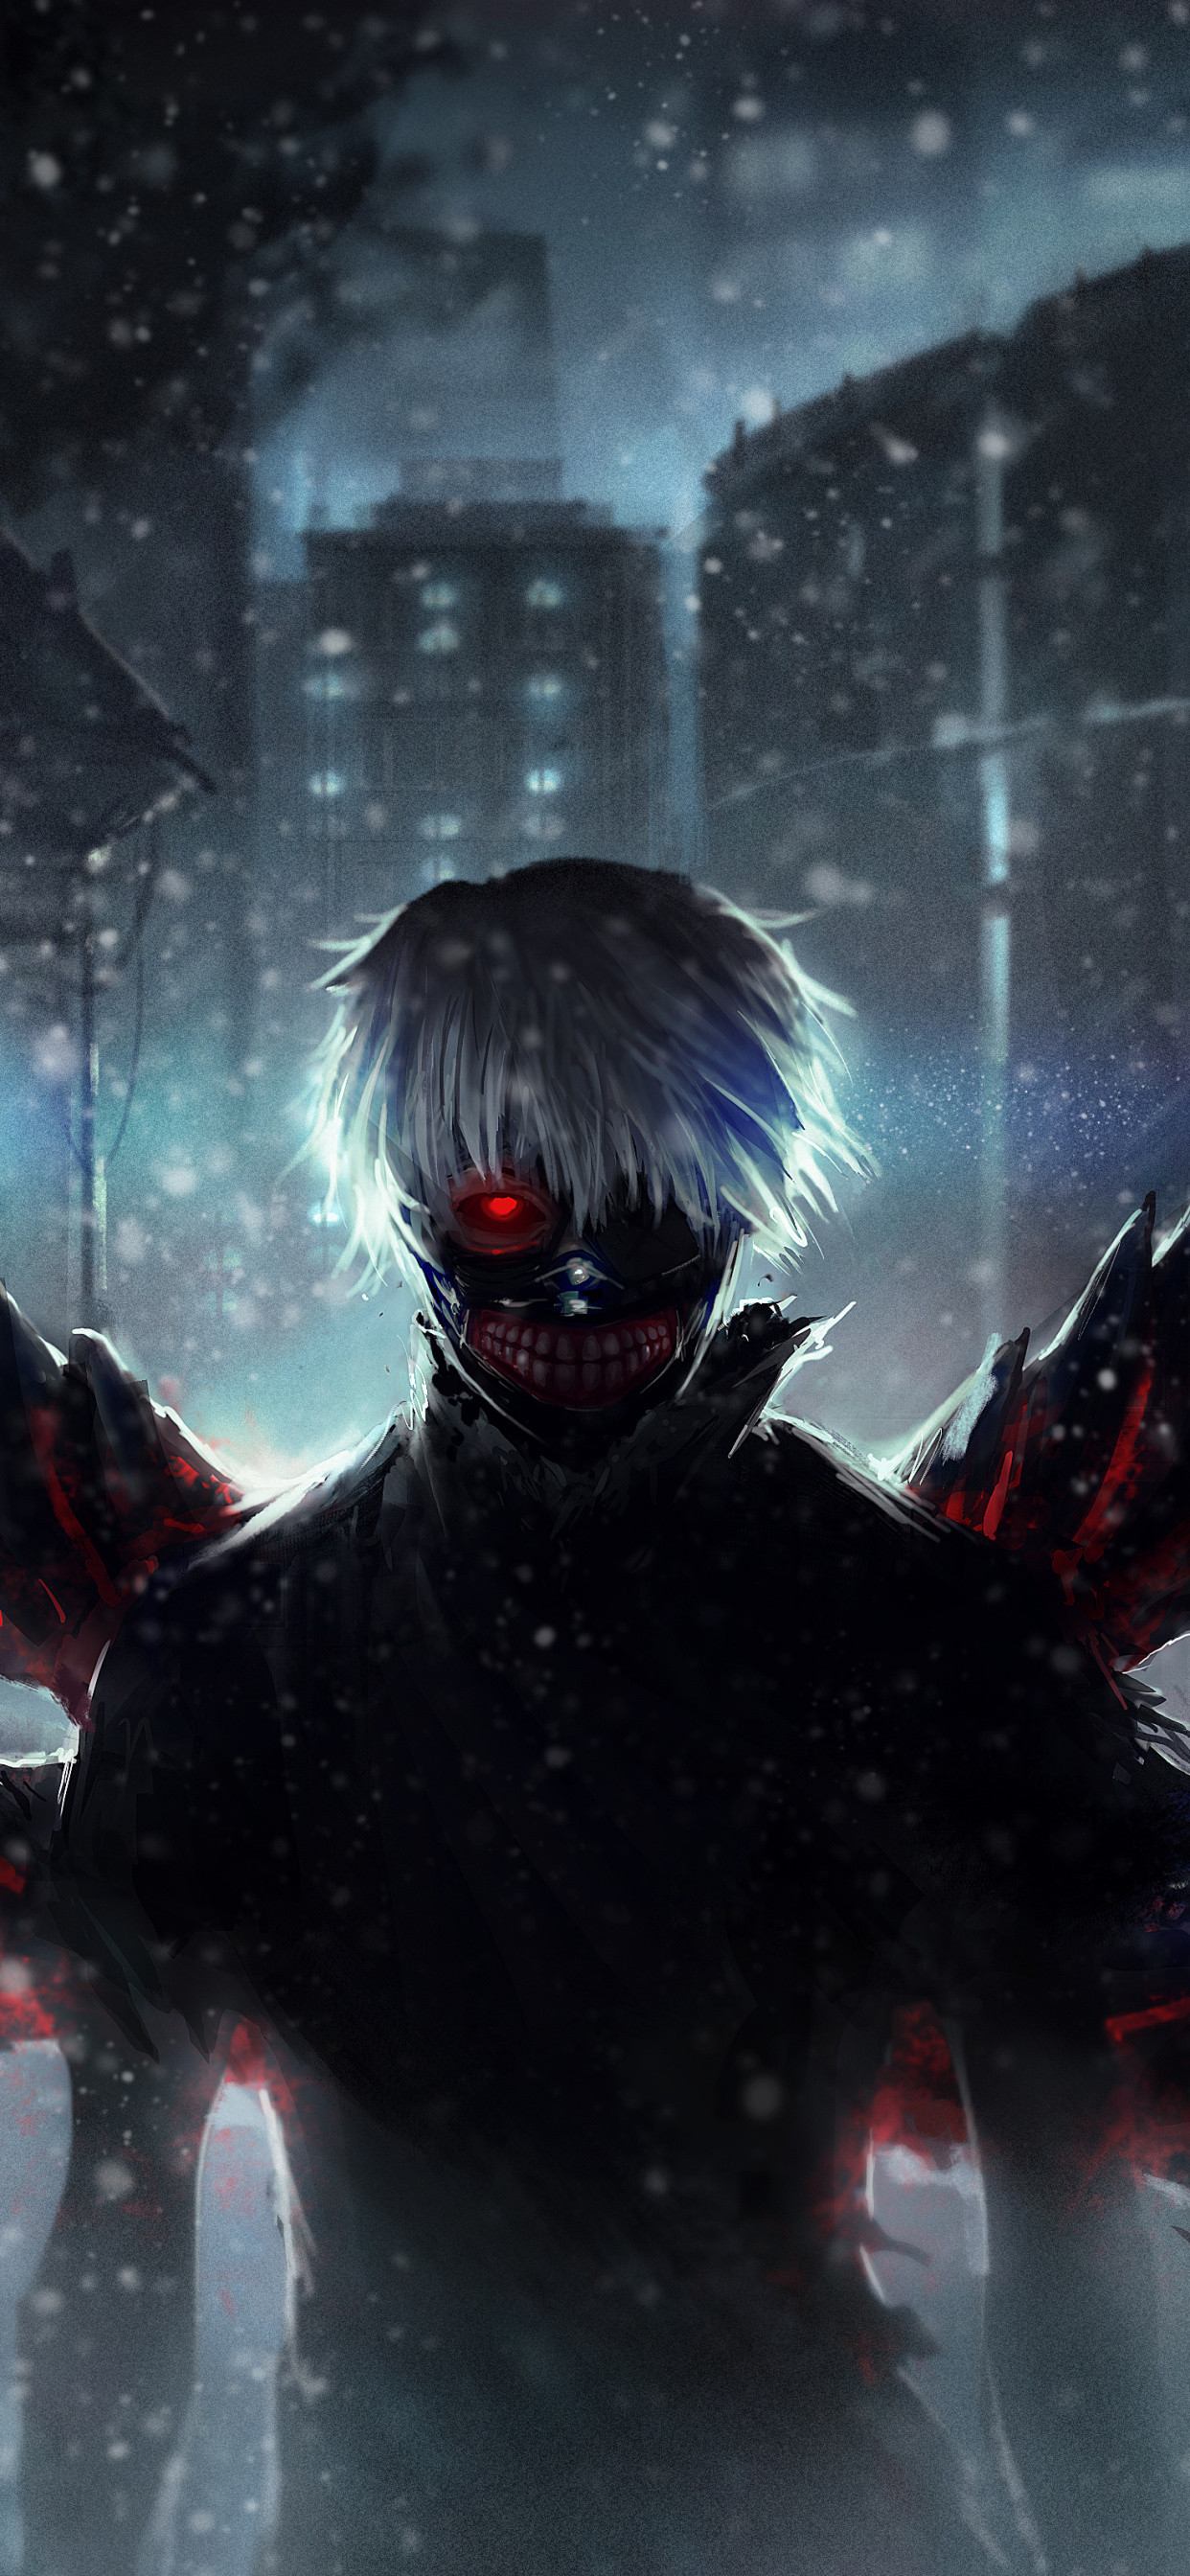 wallpaper anime cool,demon,pc game,darkness,fictional character,anime